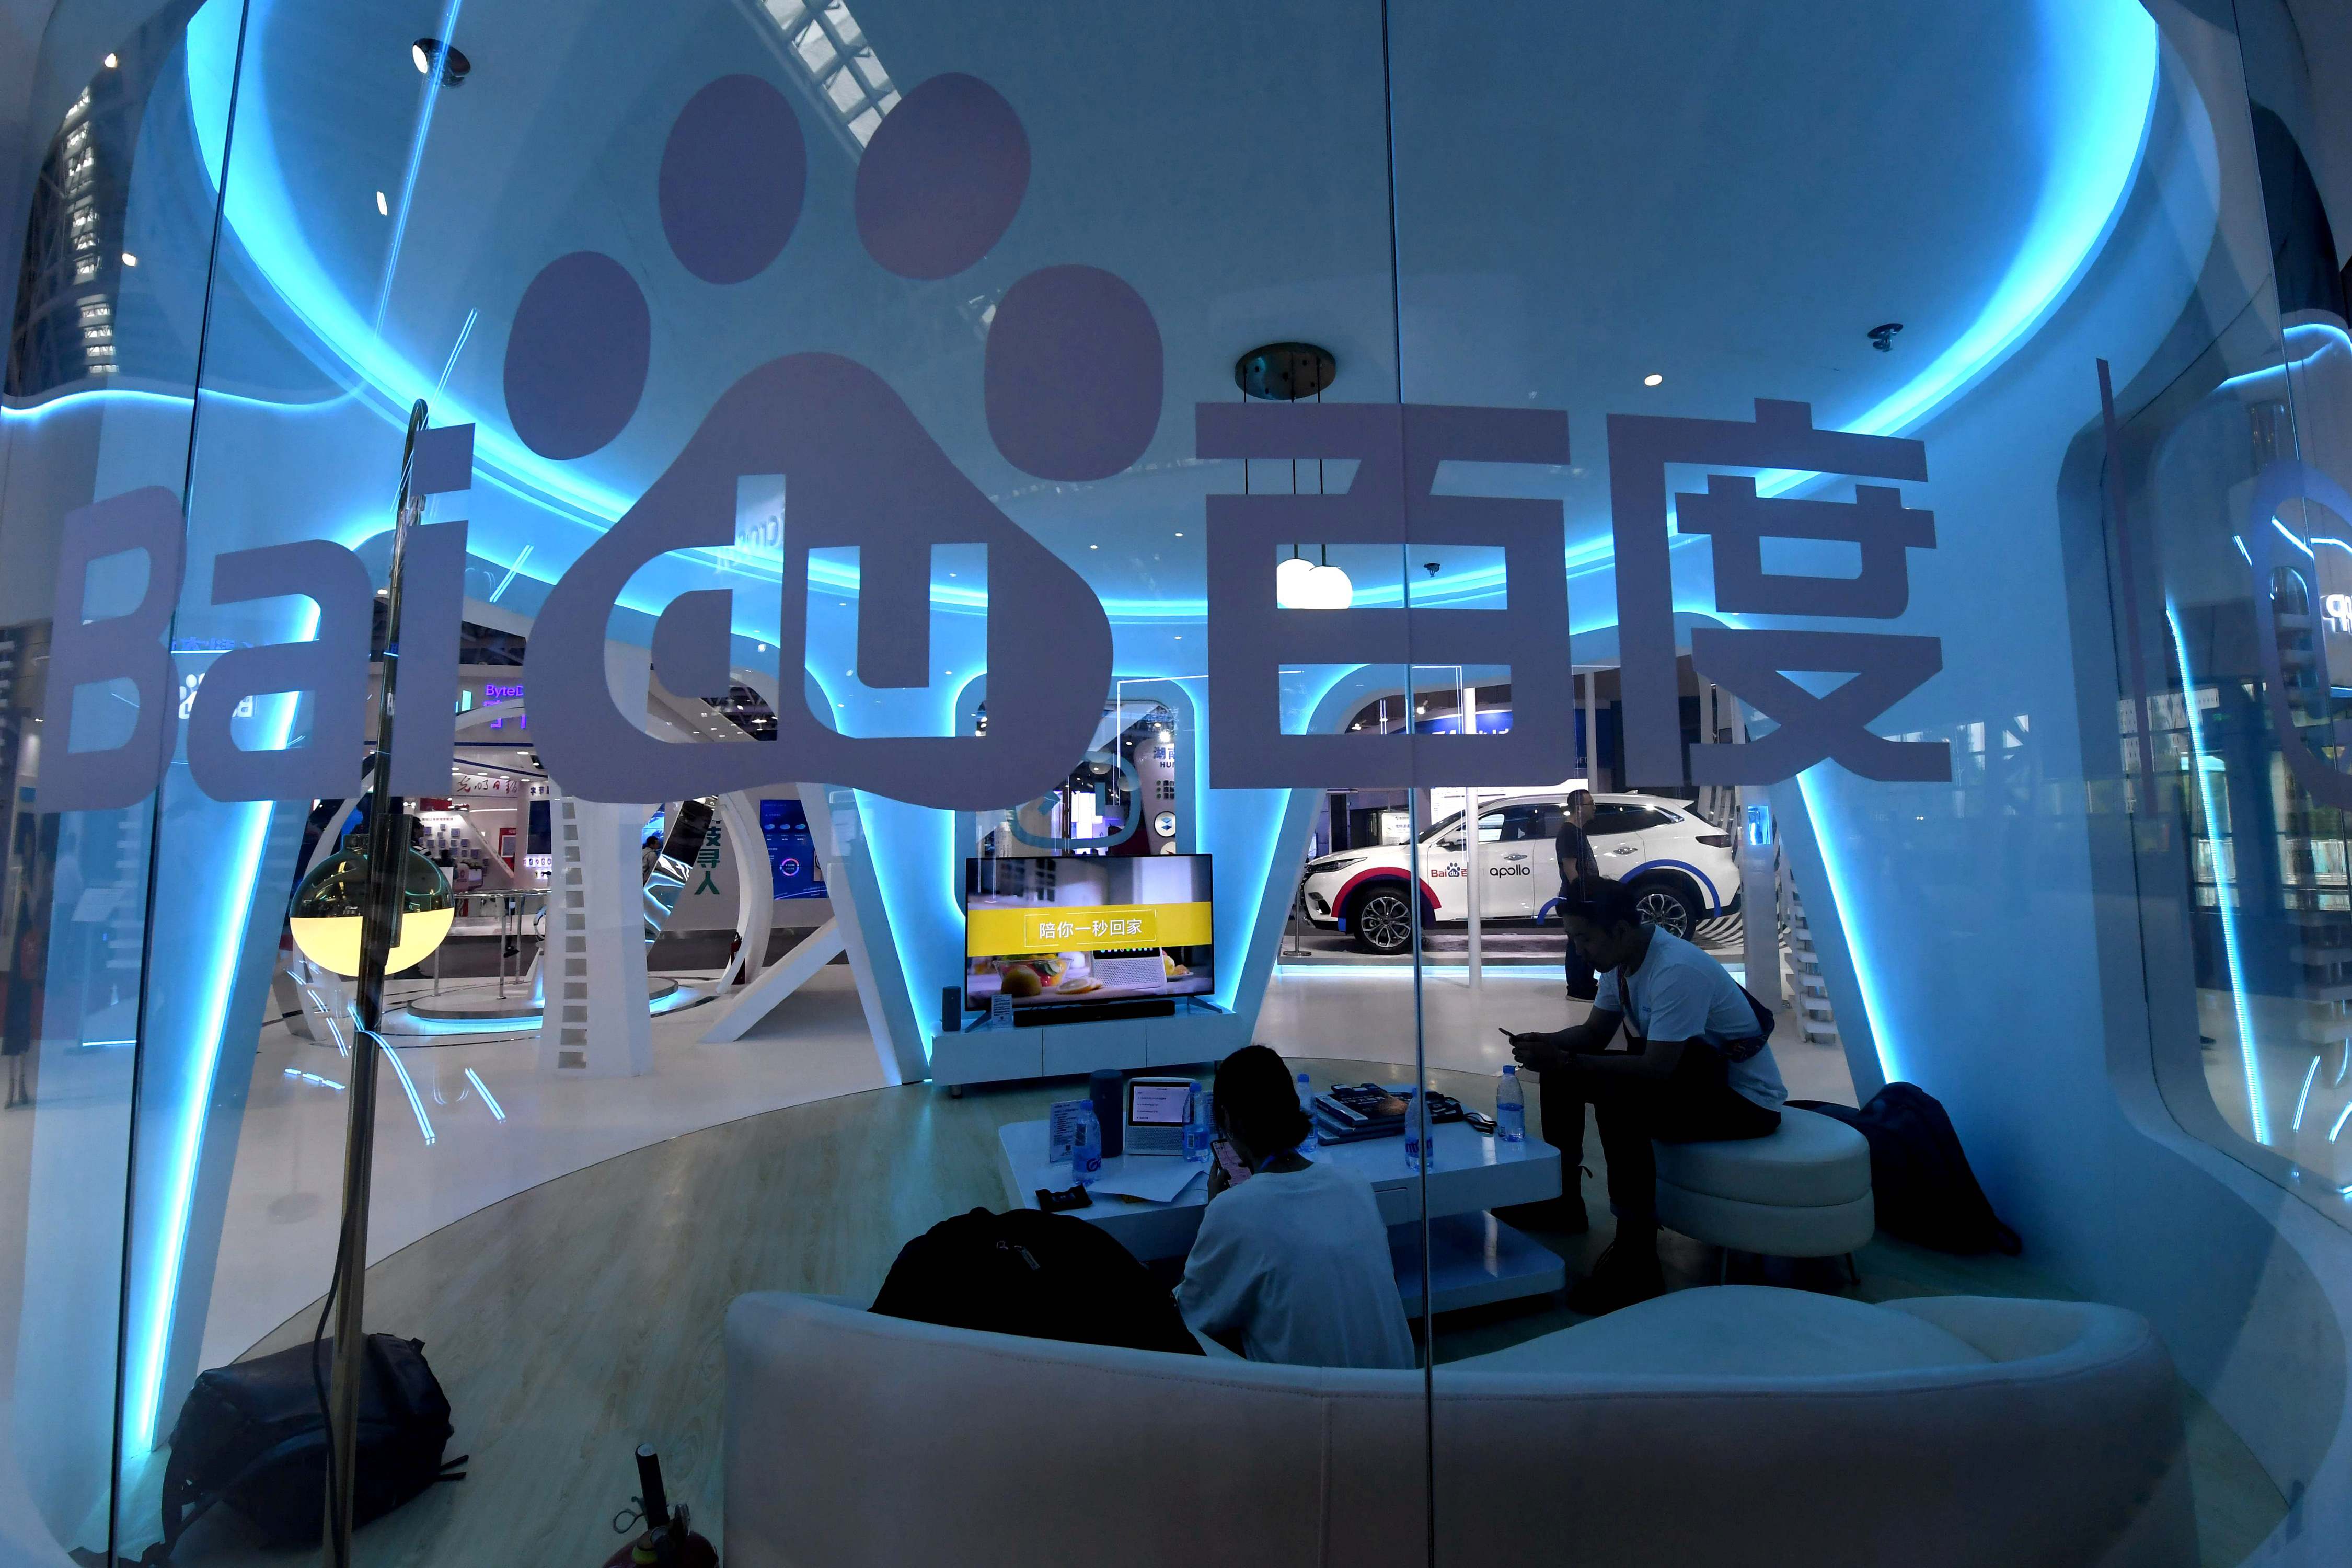 Sign of Baidu is seen on a glass at its booth during the Digital China exhibition in Fuzhou, Fujian